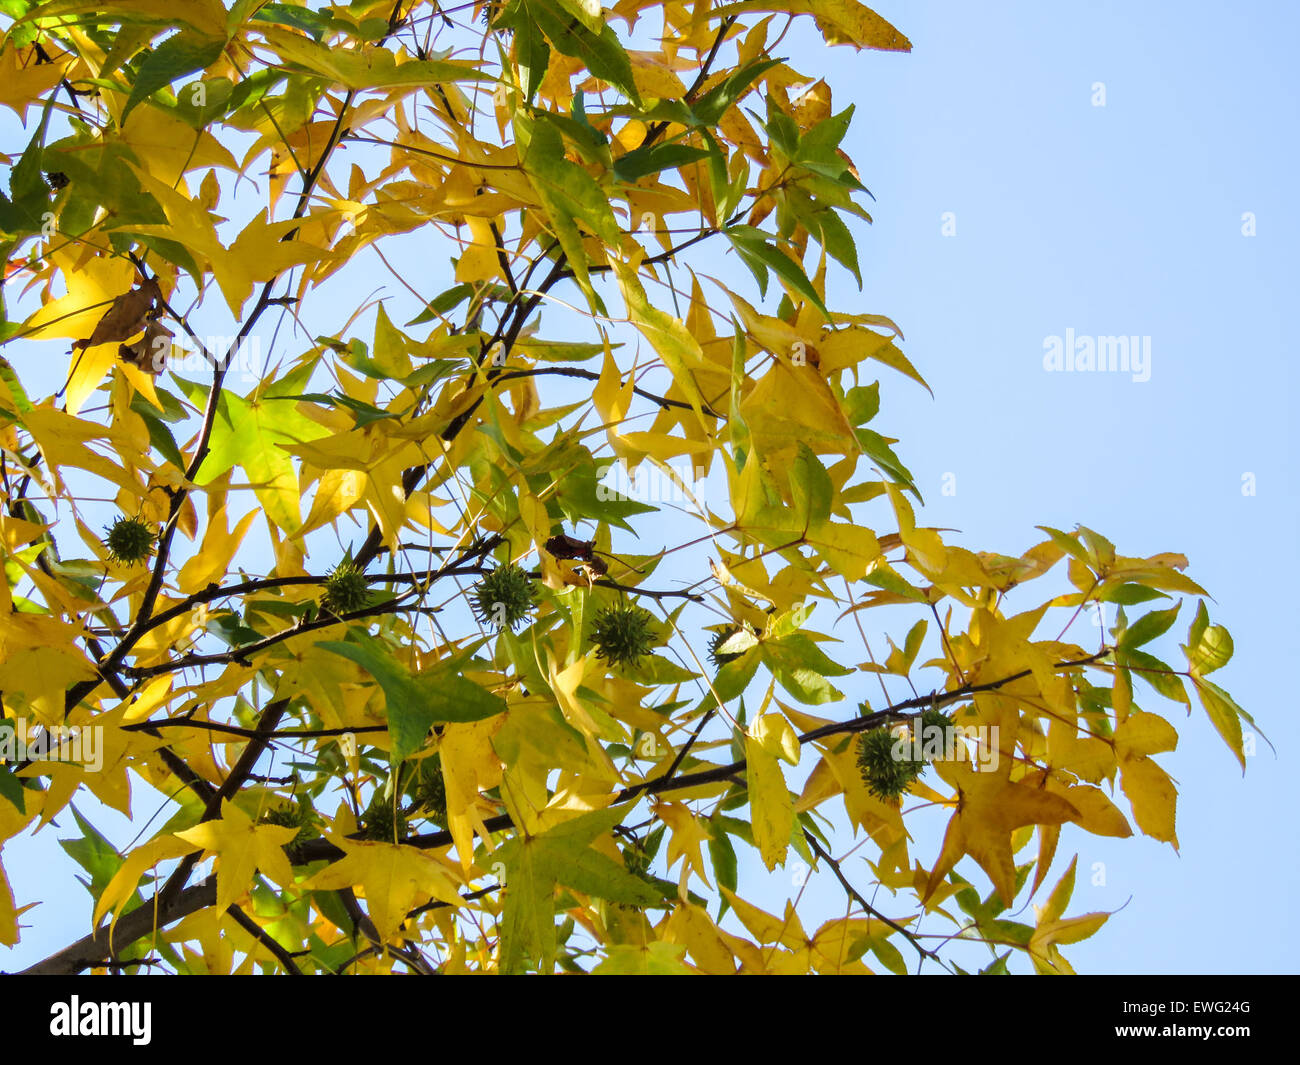 Yellow and Green Tree Leaves on Branches with Fruits Stock Photo